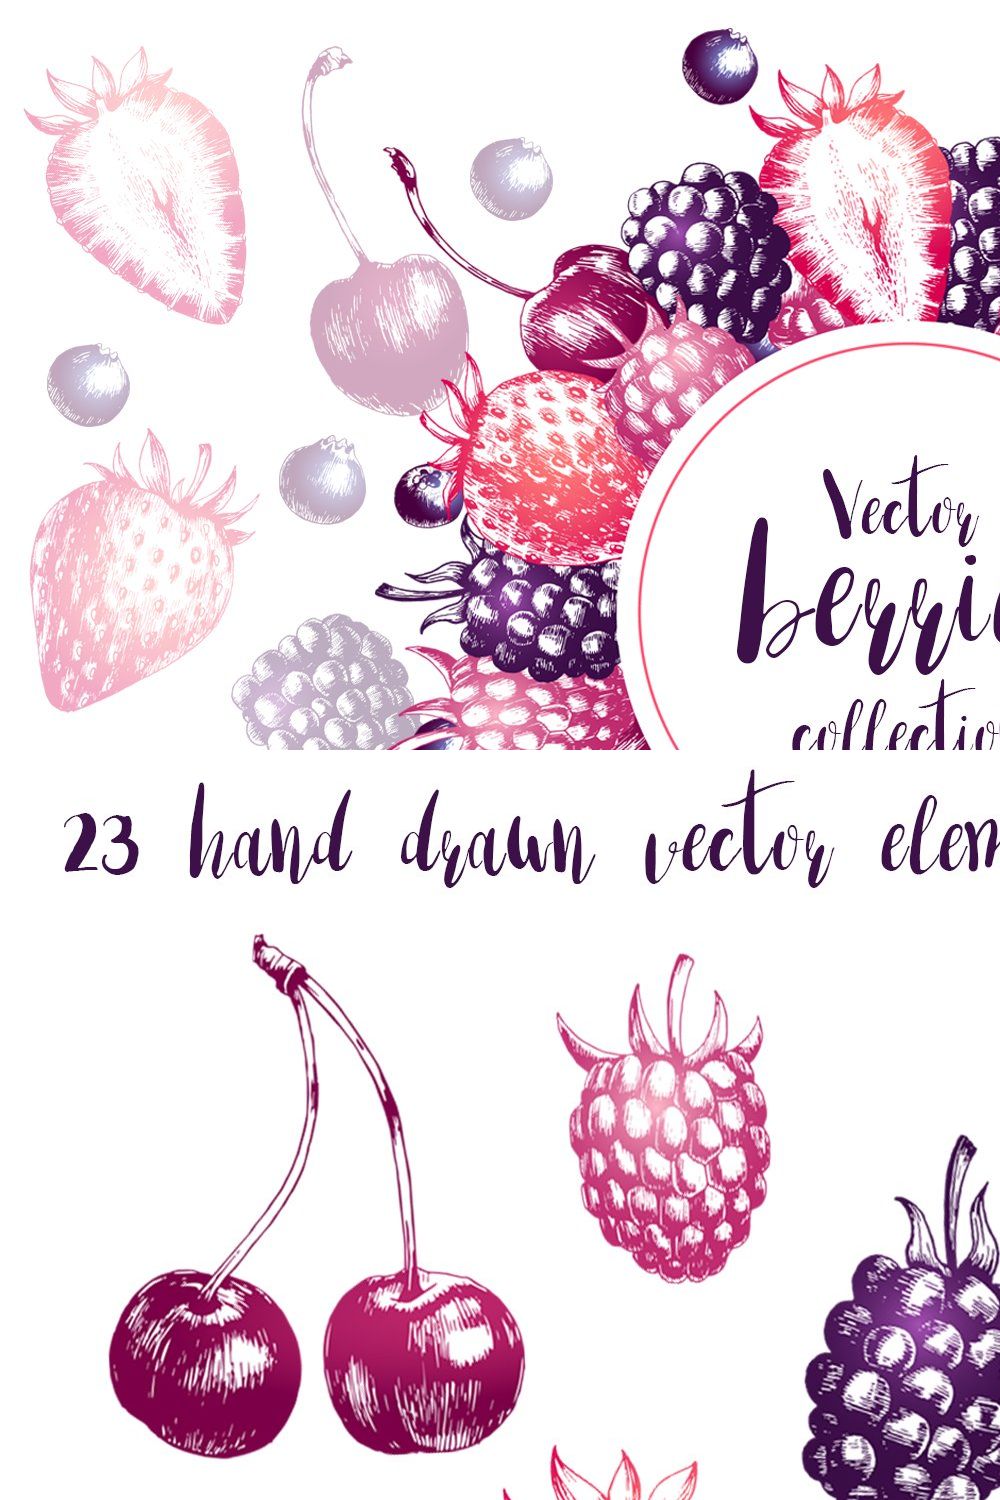 Vector berries collection pinterest preview image.